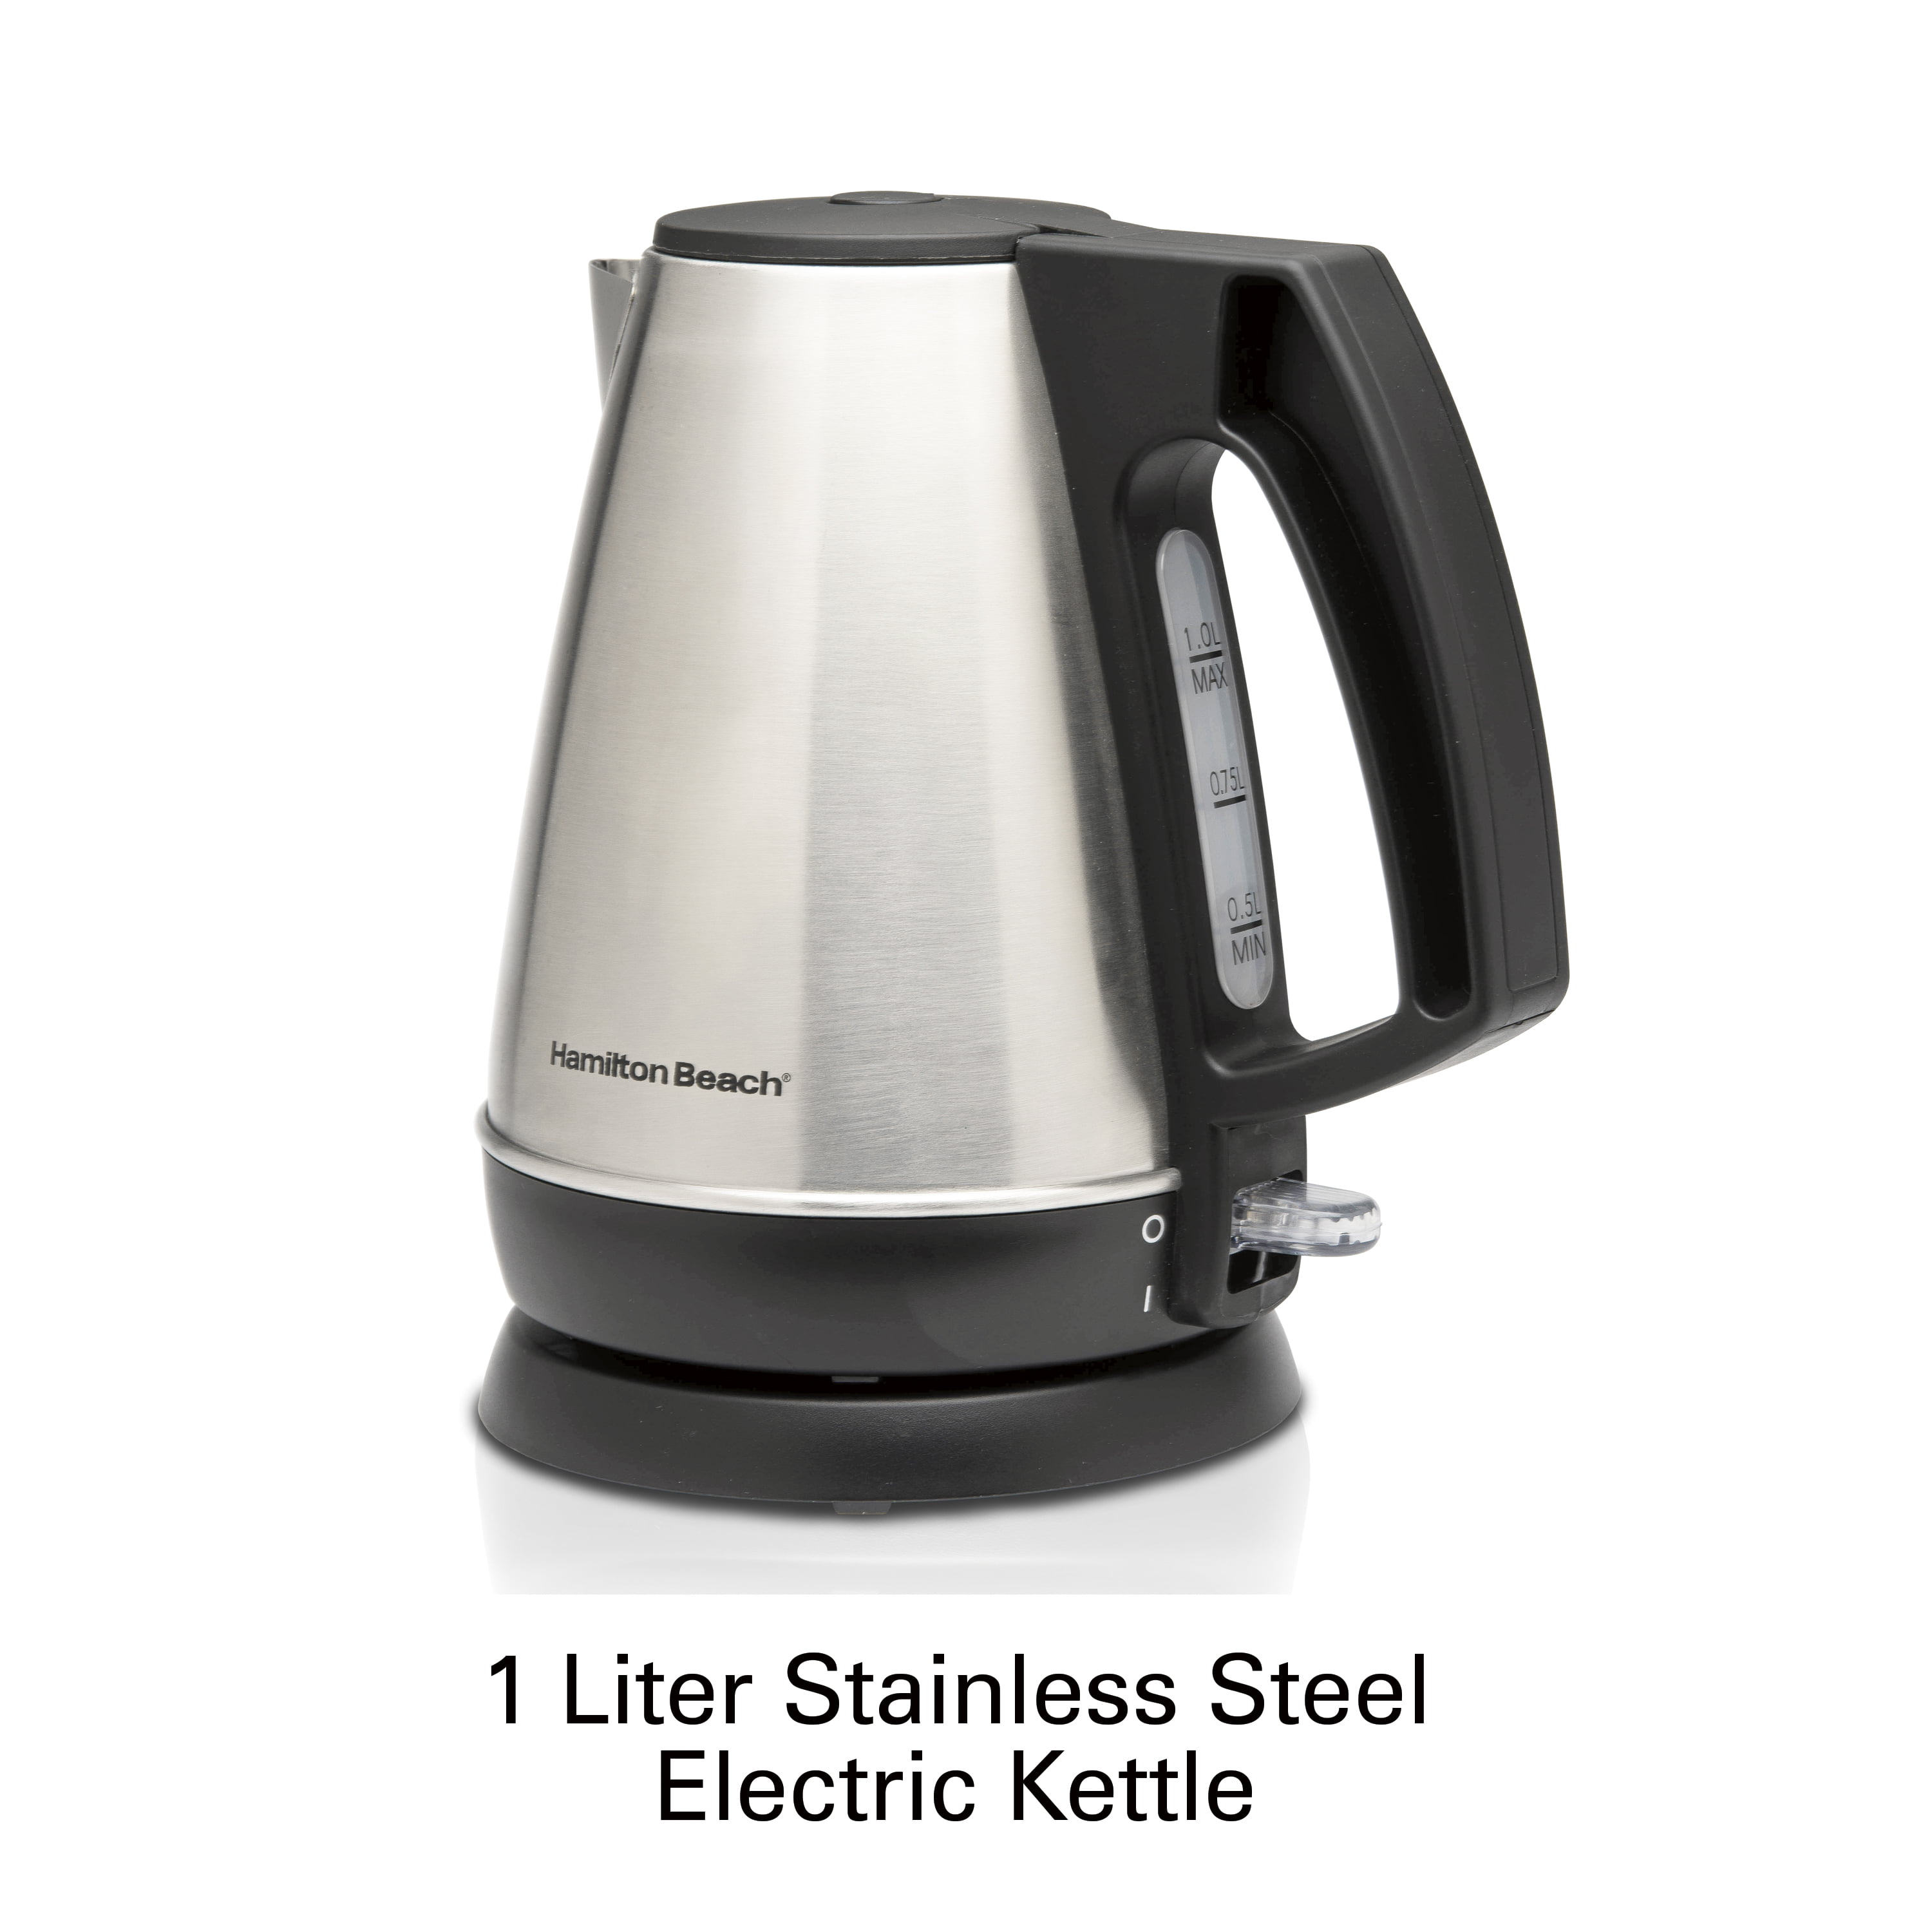 magic chef electric kettle